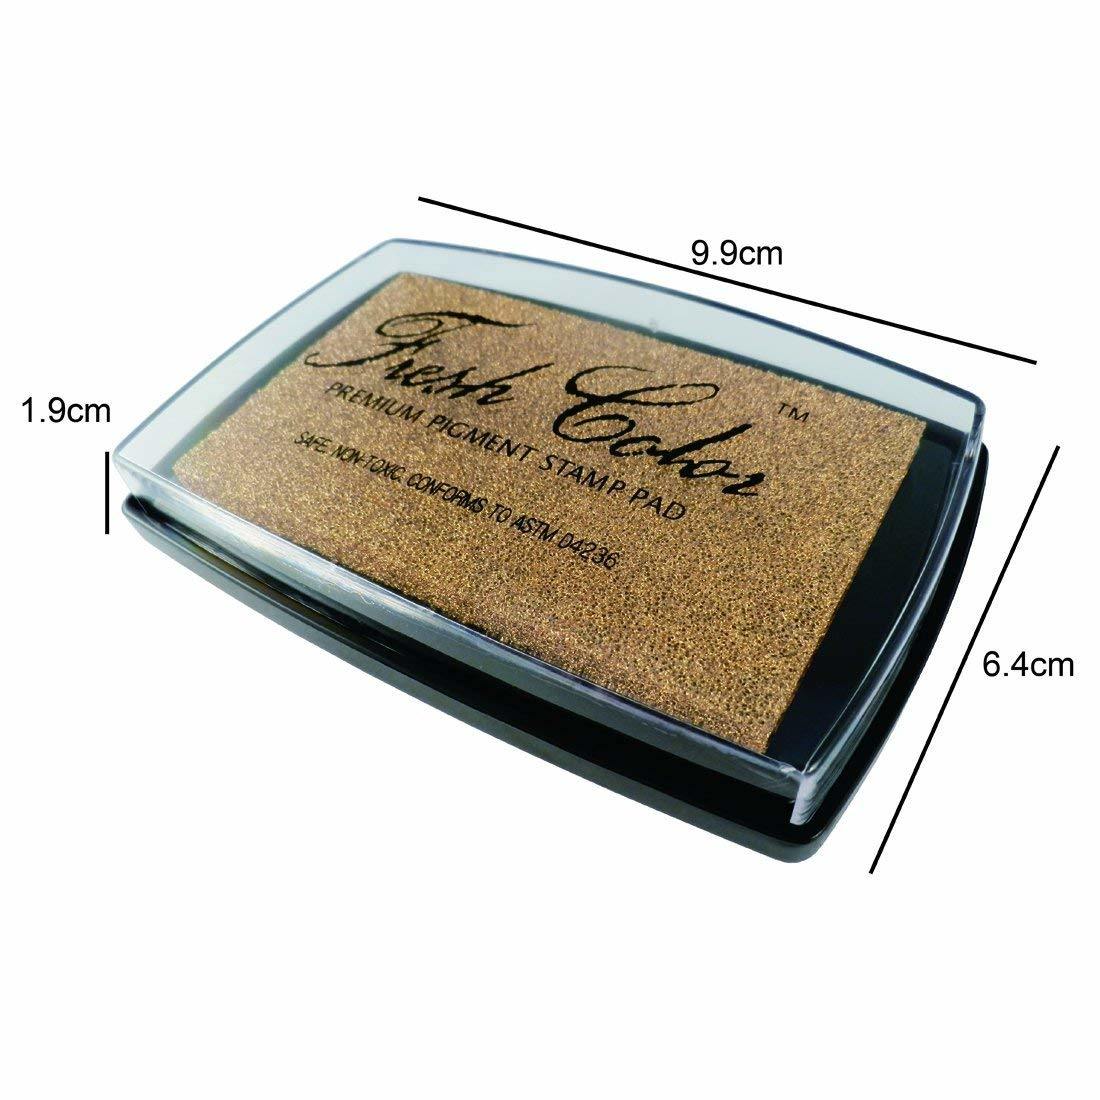 Stamp Pad;  Ink Pads for Rubber Stamps;  Wedding Card;  Wedding Invitation;  Stamps for Crafts;  Scrapbooking Supplies;  Card Making;  Permanent Ink Pads;  Non Toxic;  Safe (Gold Ink Pad)